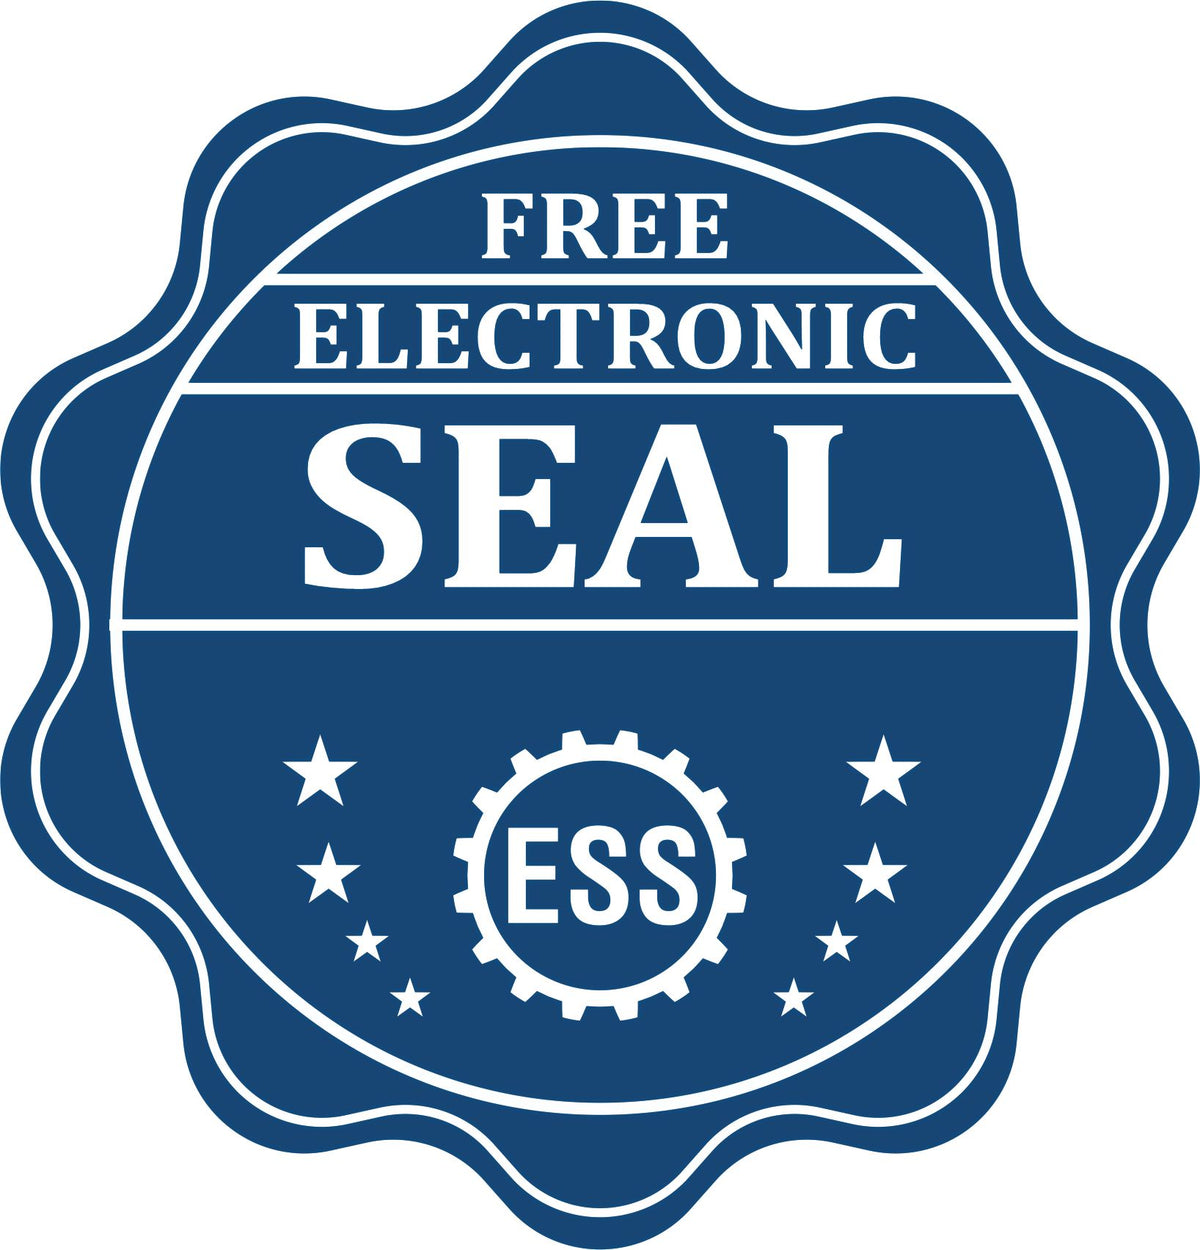 A badge showing a free electronic seal for the State of Colorado Long Reach Architectural Embossing Seal with stars and the ESS gear on the emblem.